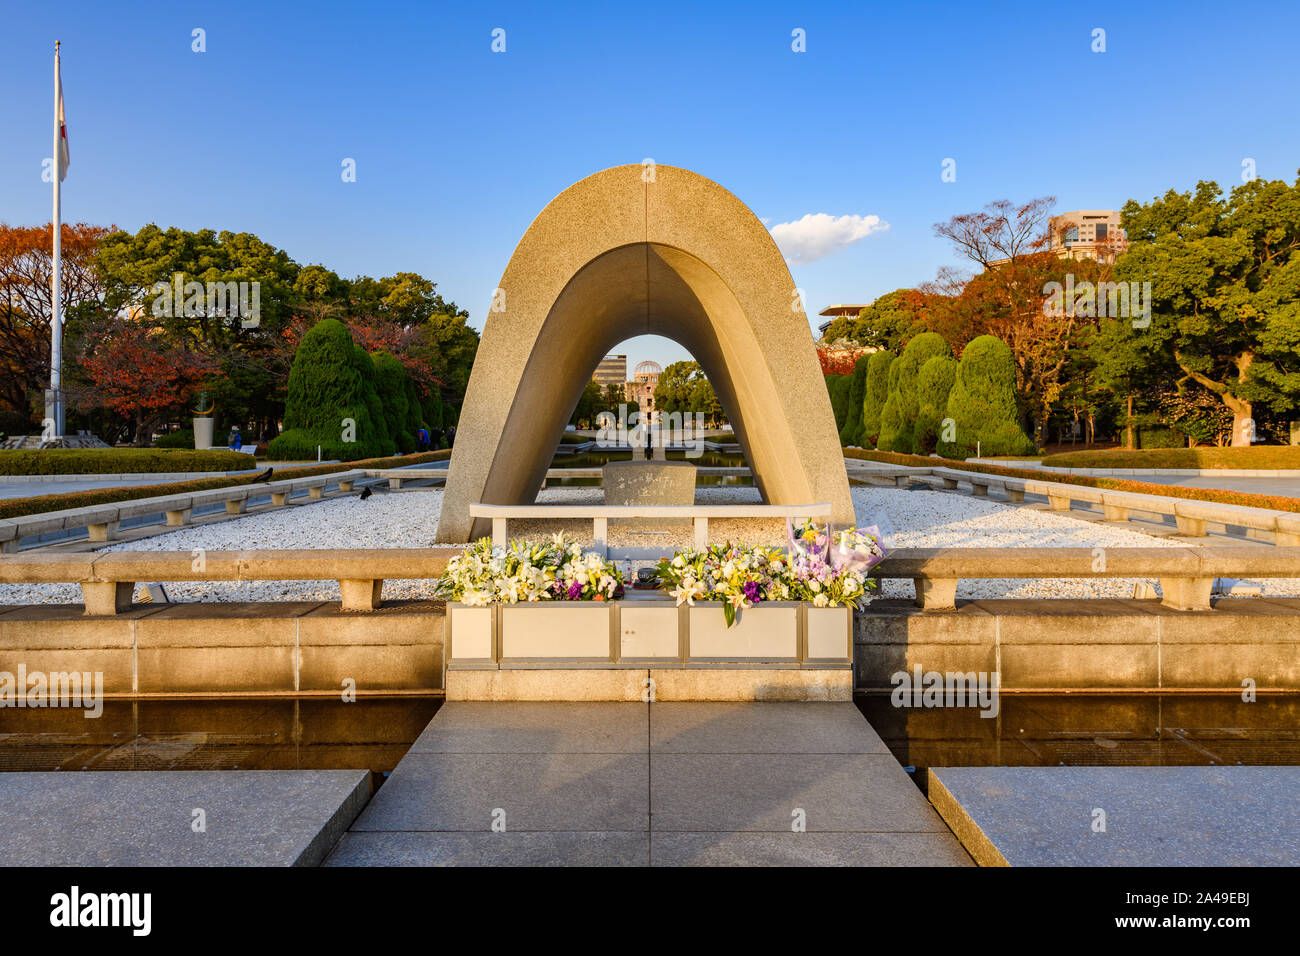 Hiroshima, Japan - 29 November 2018: Hiroshima, Japan peace memorial cenotaph monument in remembrance of victims from deadly Atomic Bomb Dome in World Stock Photo